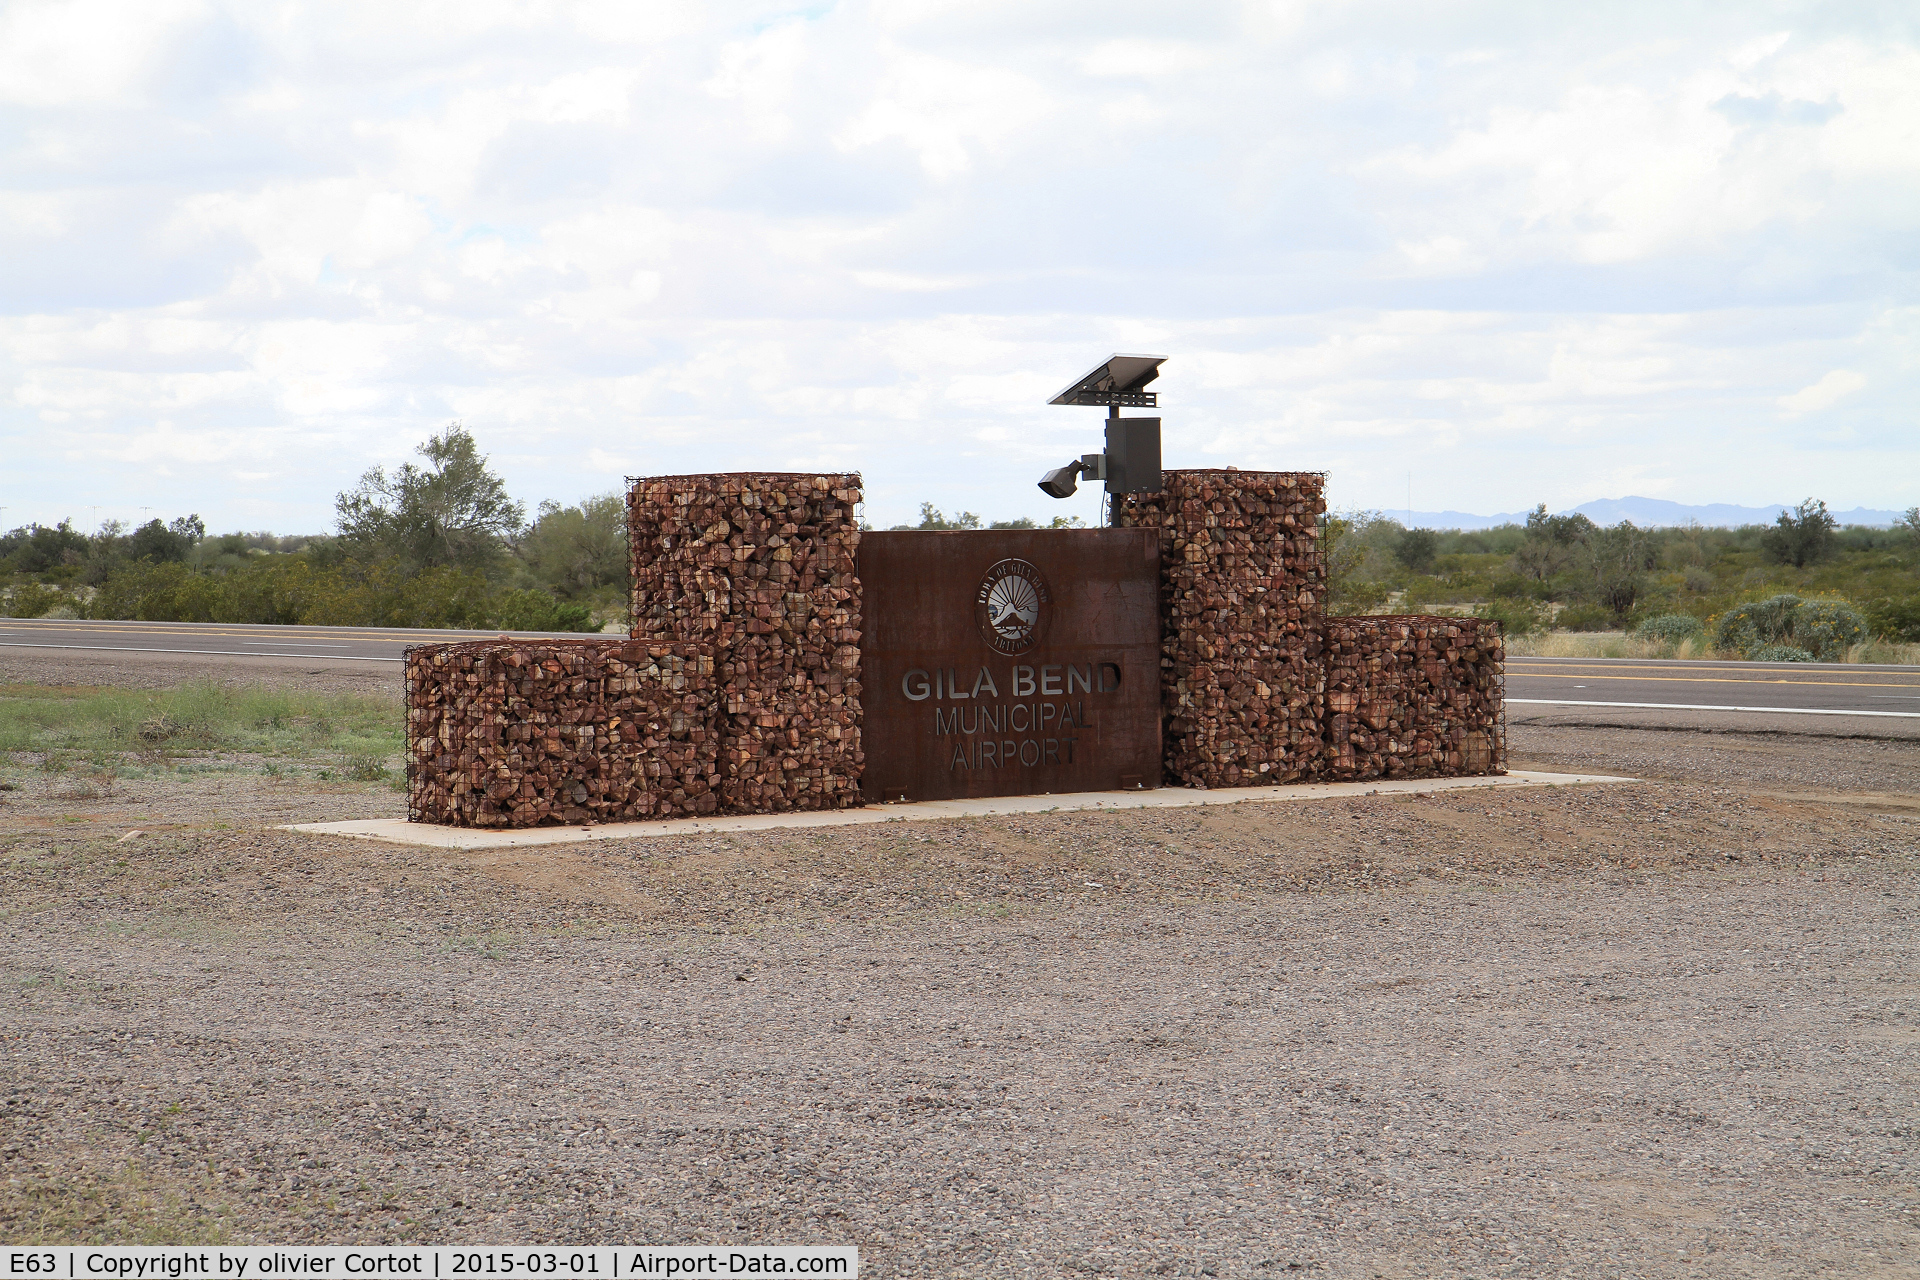 Gila Bend Municipal Airport (E63) - the entry, road side